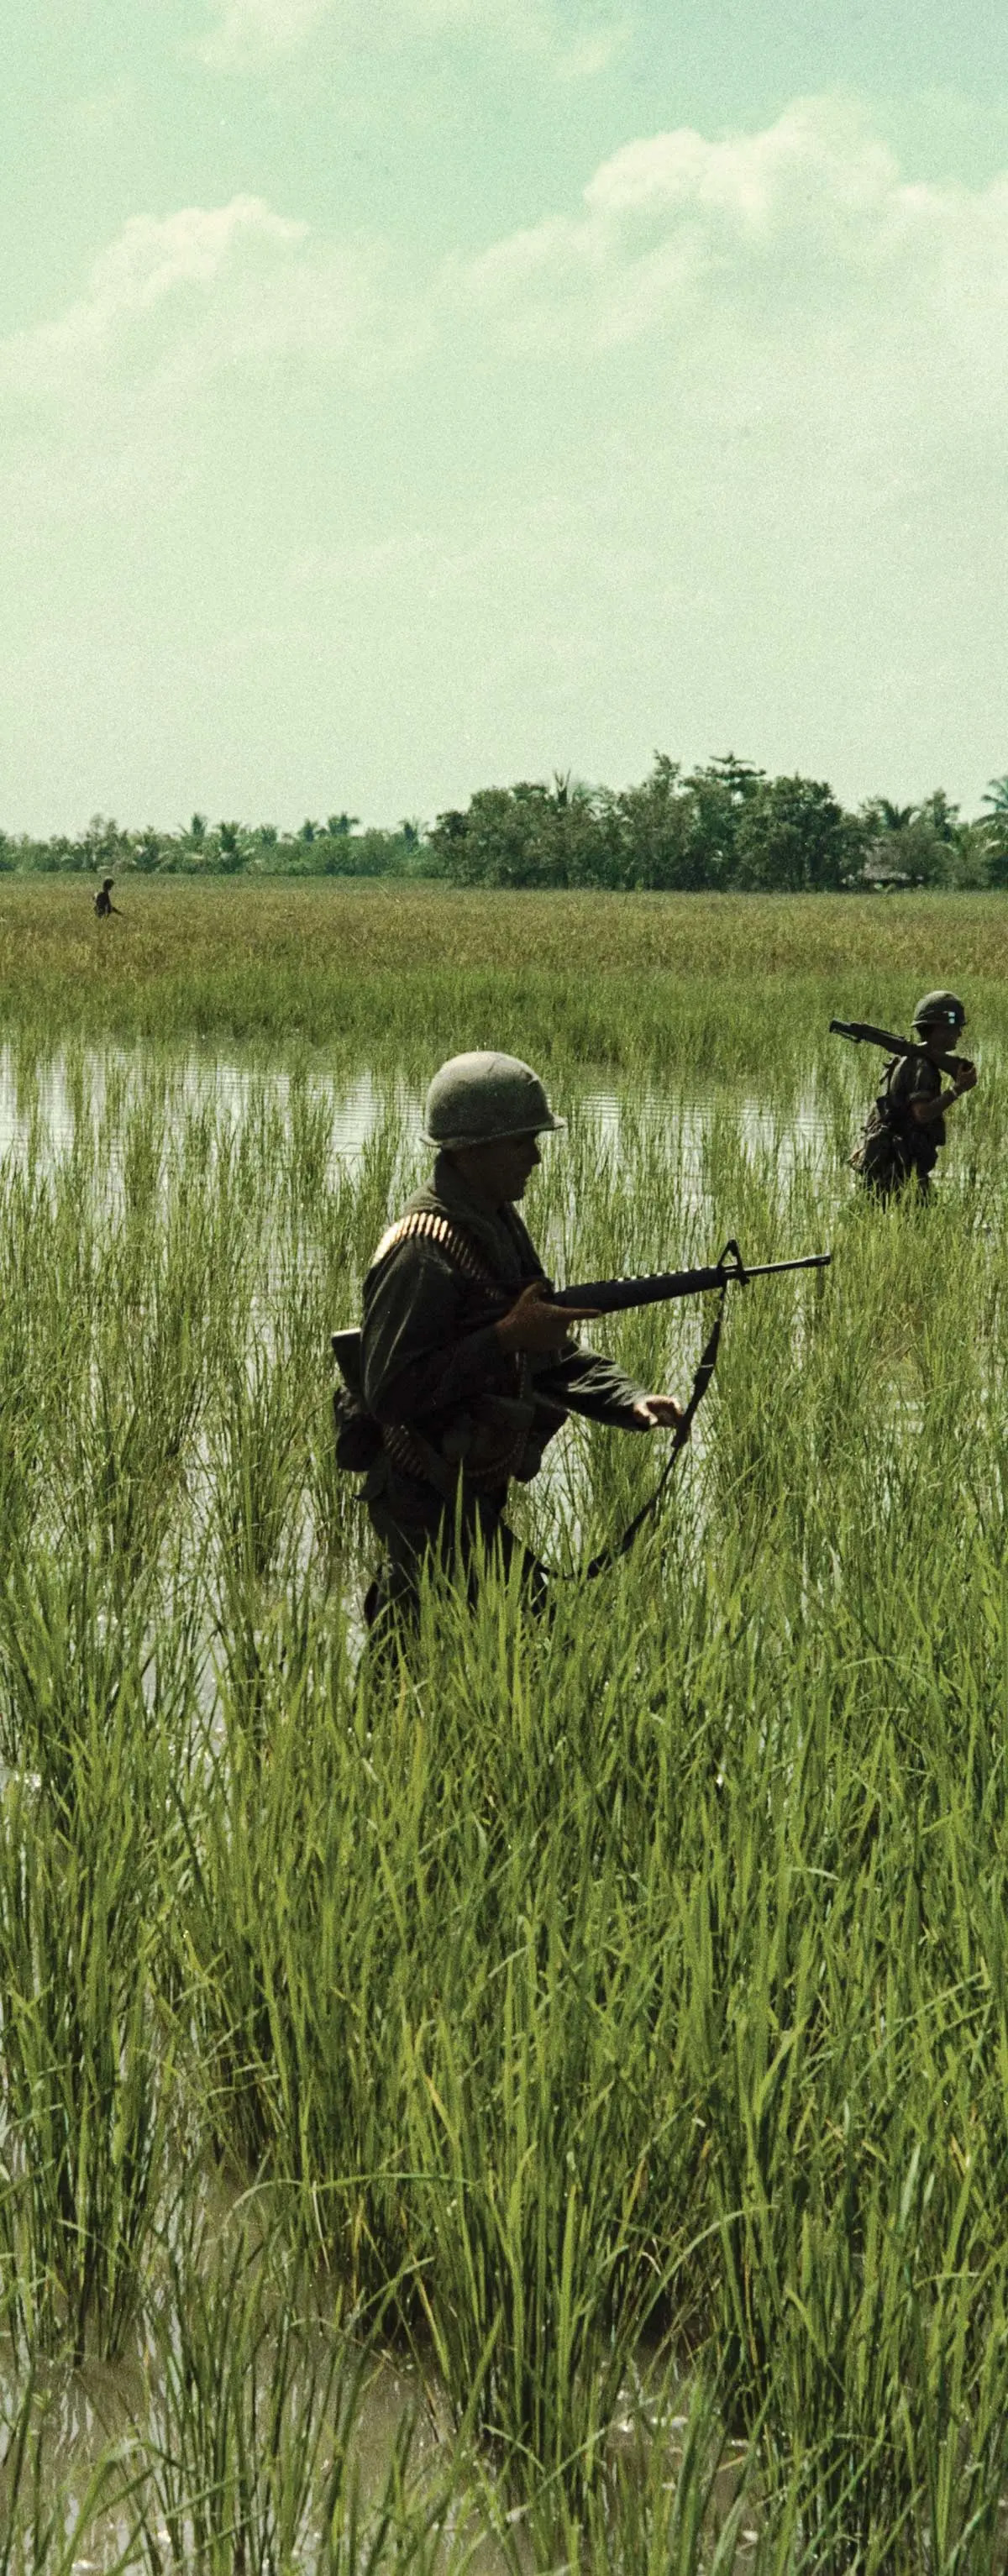 Members of Company C, 3rd Battalion, 7th Infantry, 199th Light Infantry Brigade, move in a skirmish line through rice paddies en route to their first objective, a Viet Cong controlled village, on 21 November 1967